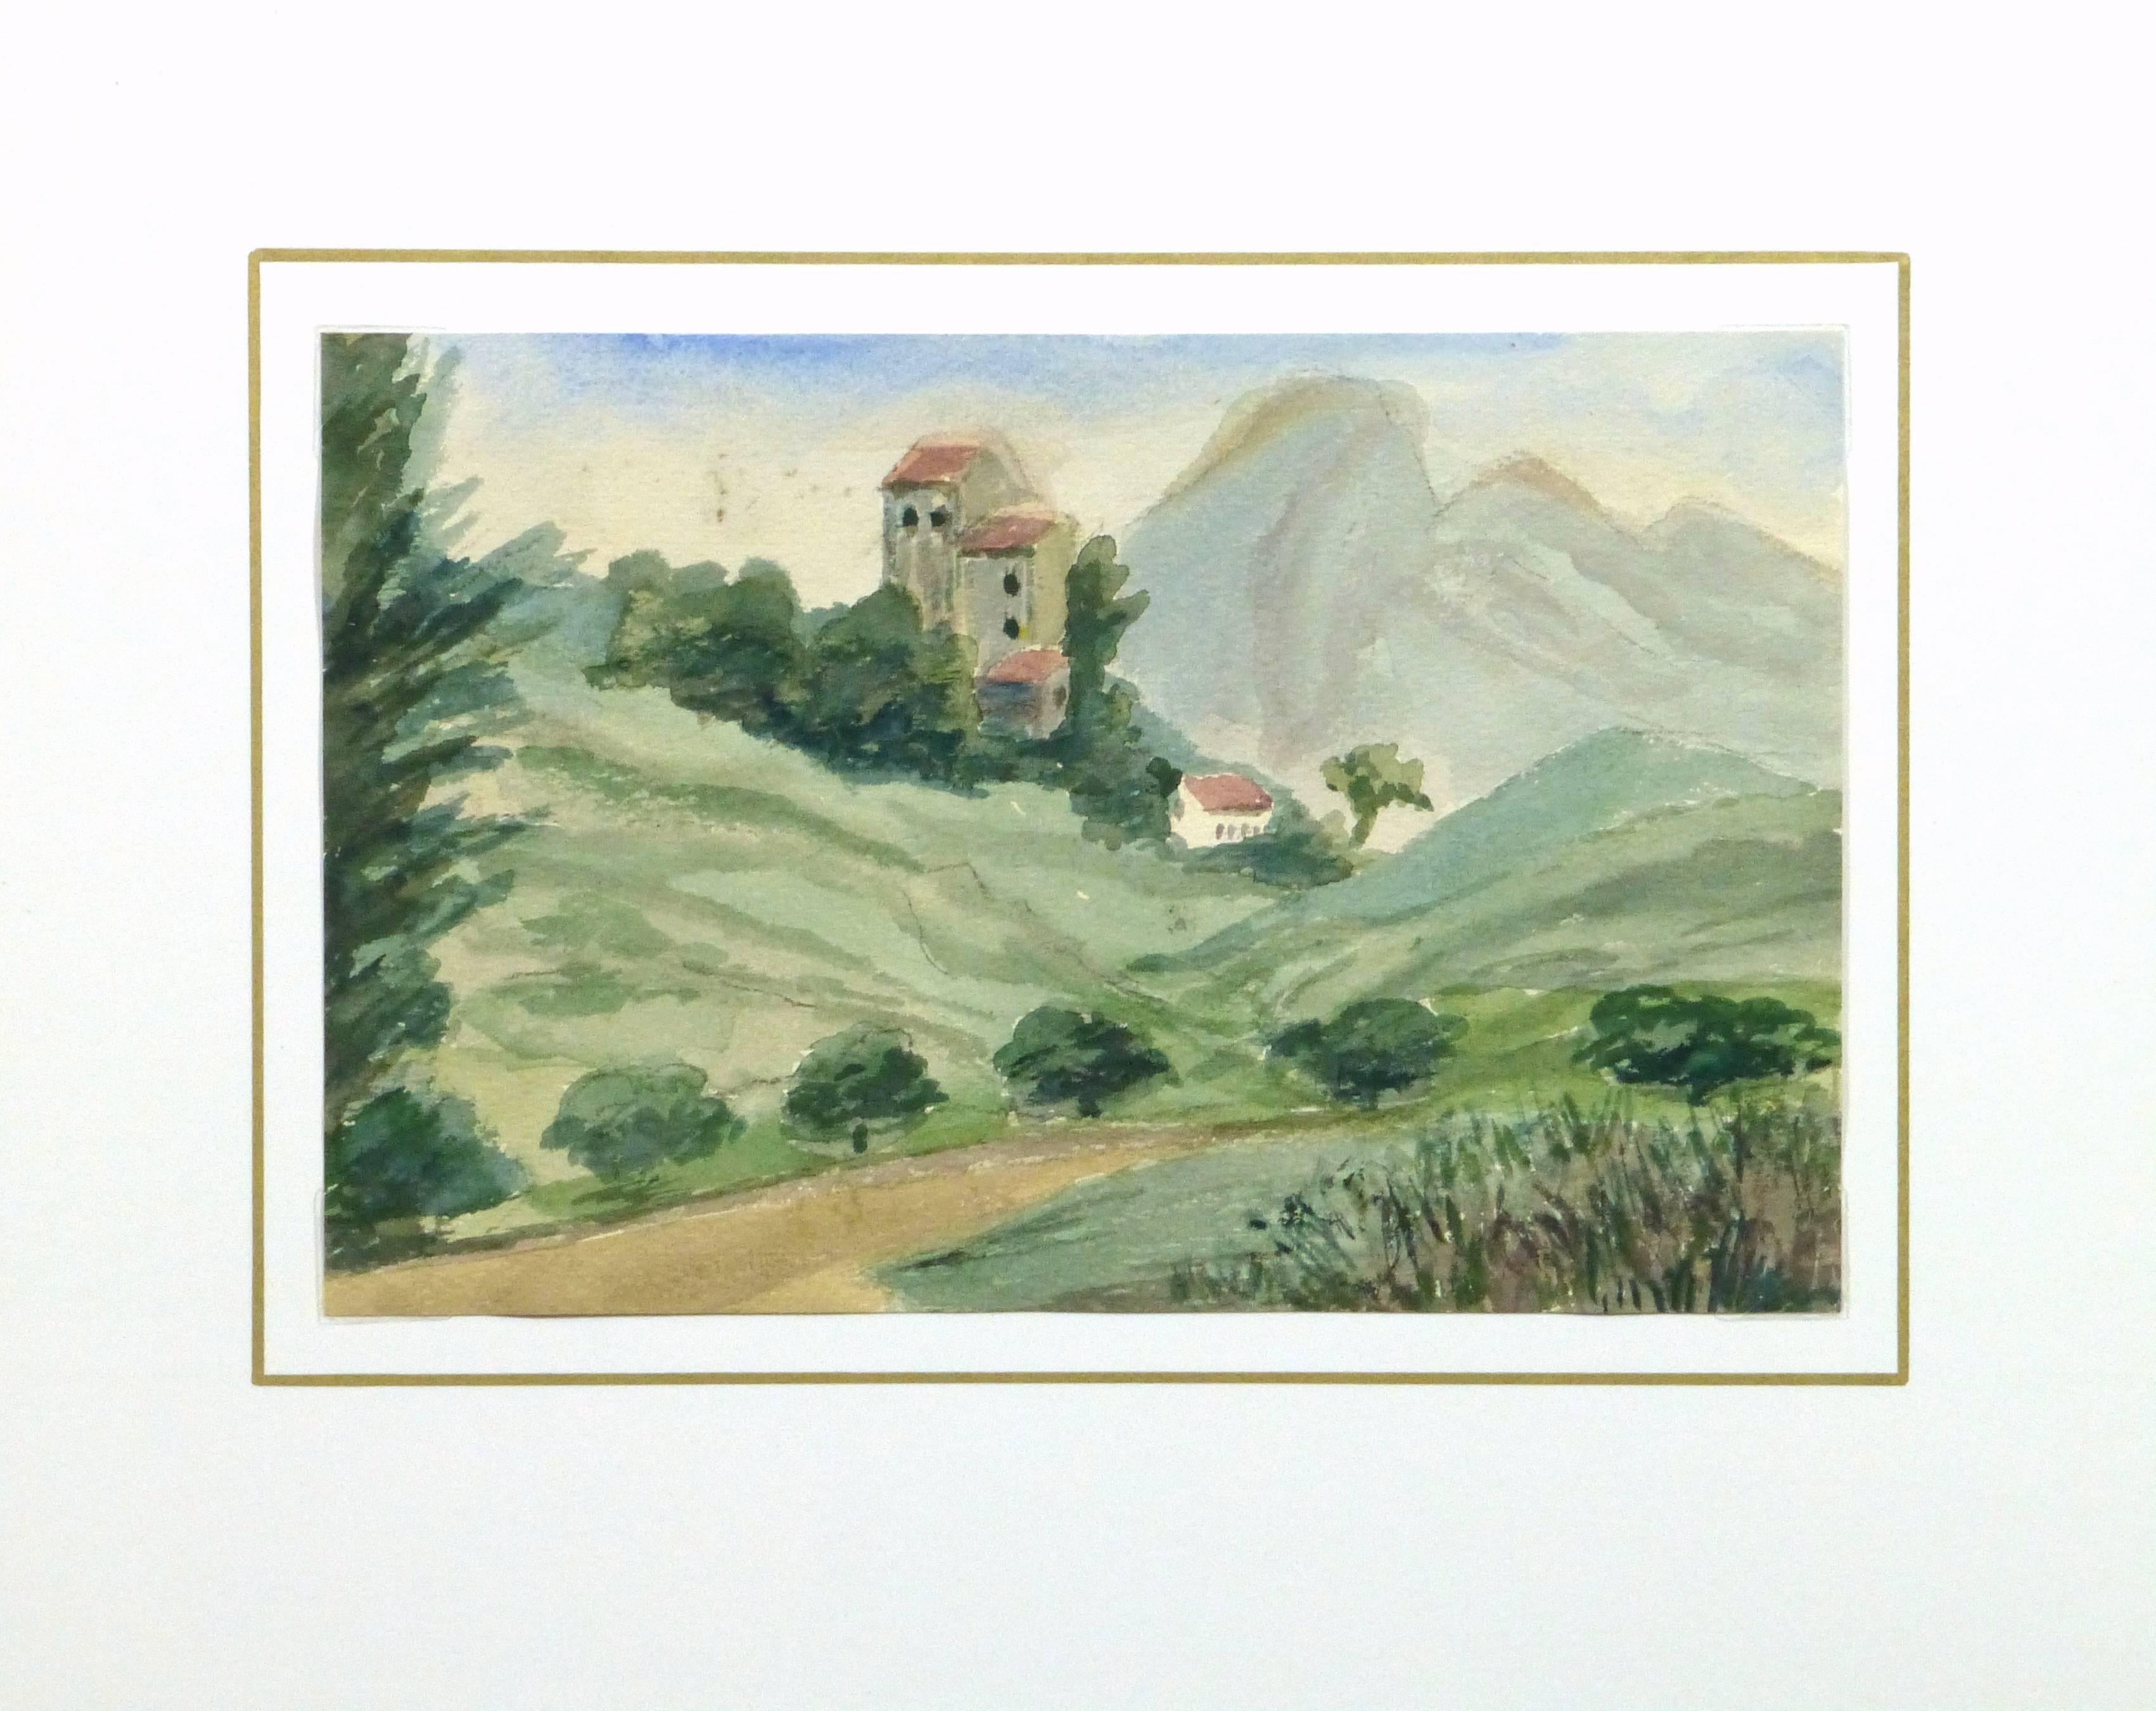 Welcoming scene of small villas backed by mountain tops in the town of Chemin des Salles, France by M. Kesseler, circa 1935. 

Original one-of-a-kind artwork on paper displayed on a white mat with a gold border. Mat fits a standard-size frame.